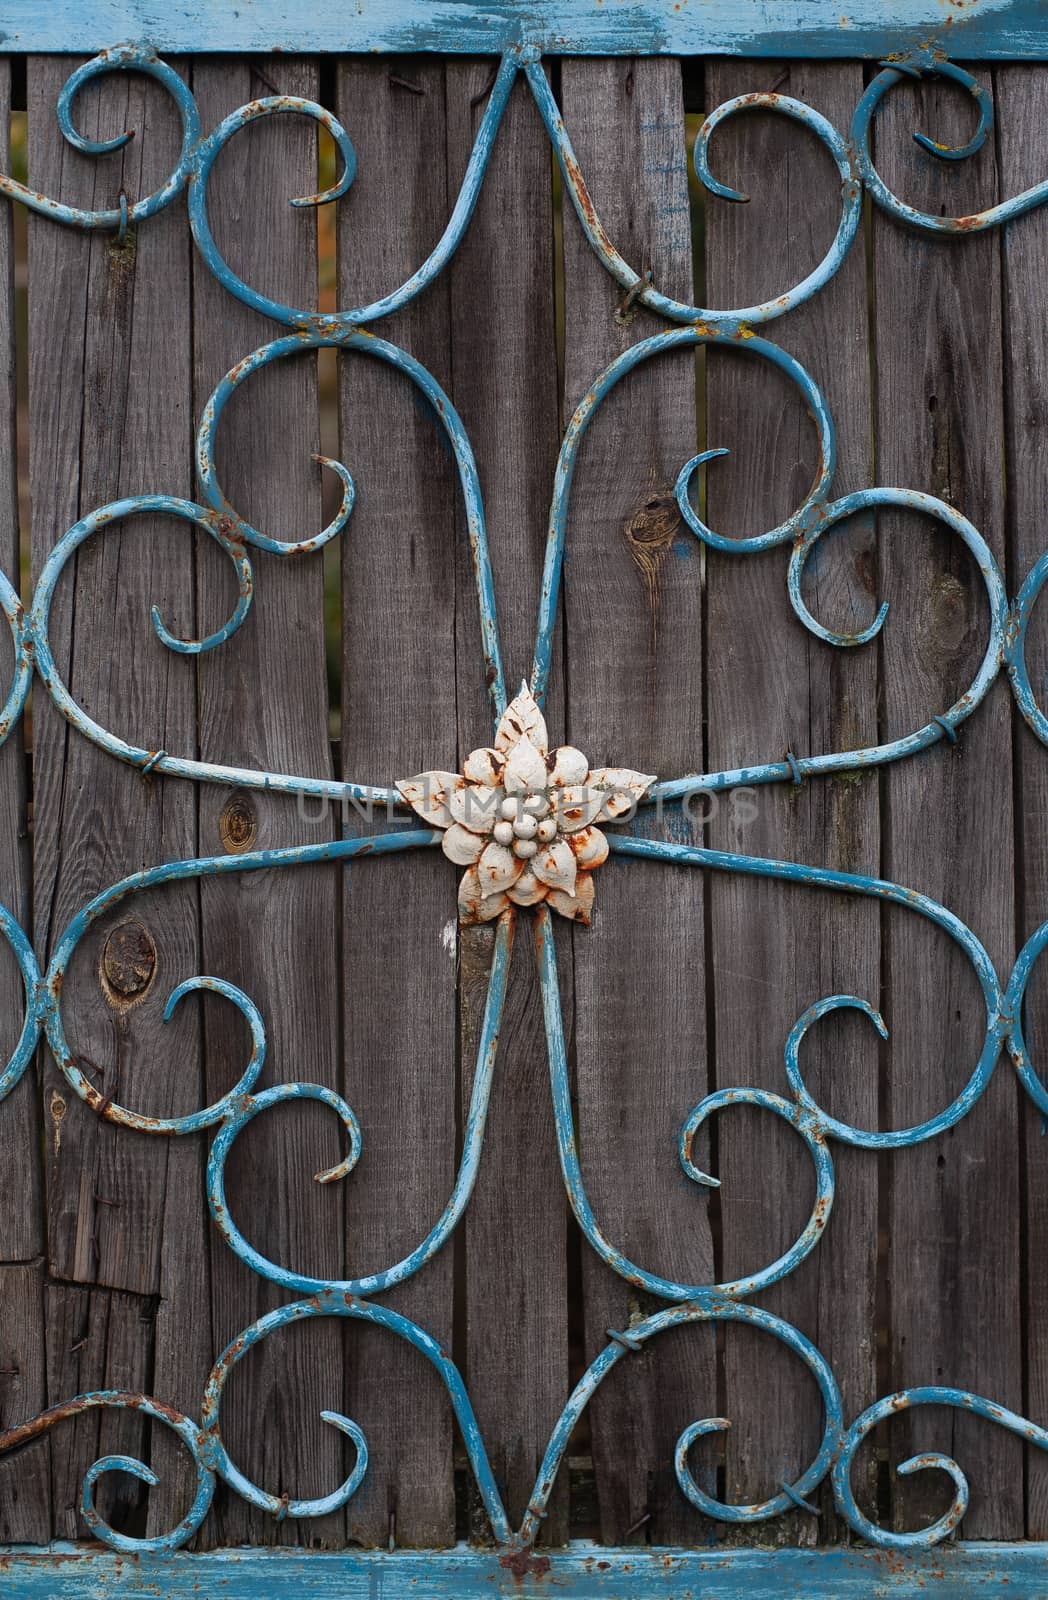 A metal fence in the form of flowers with a flower in the center